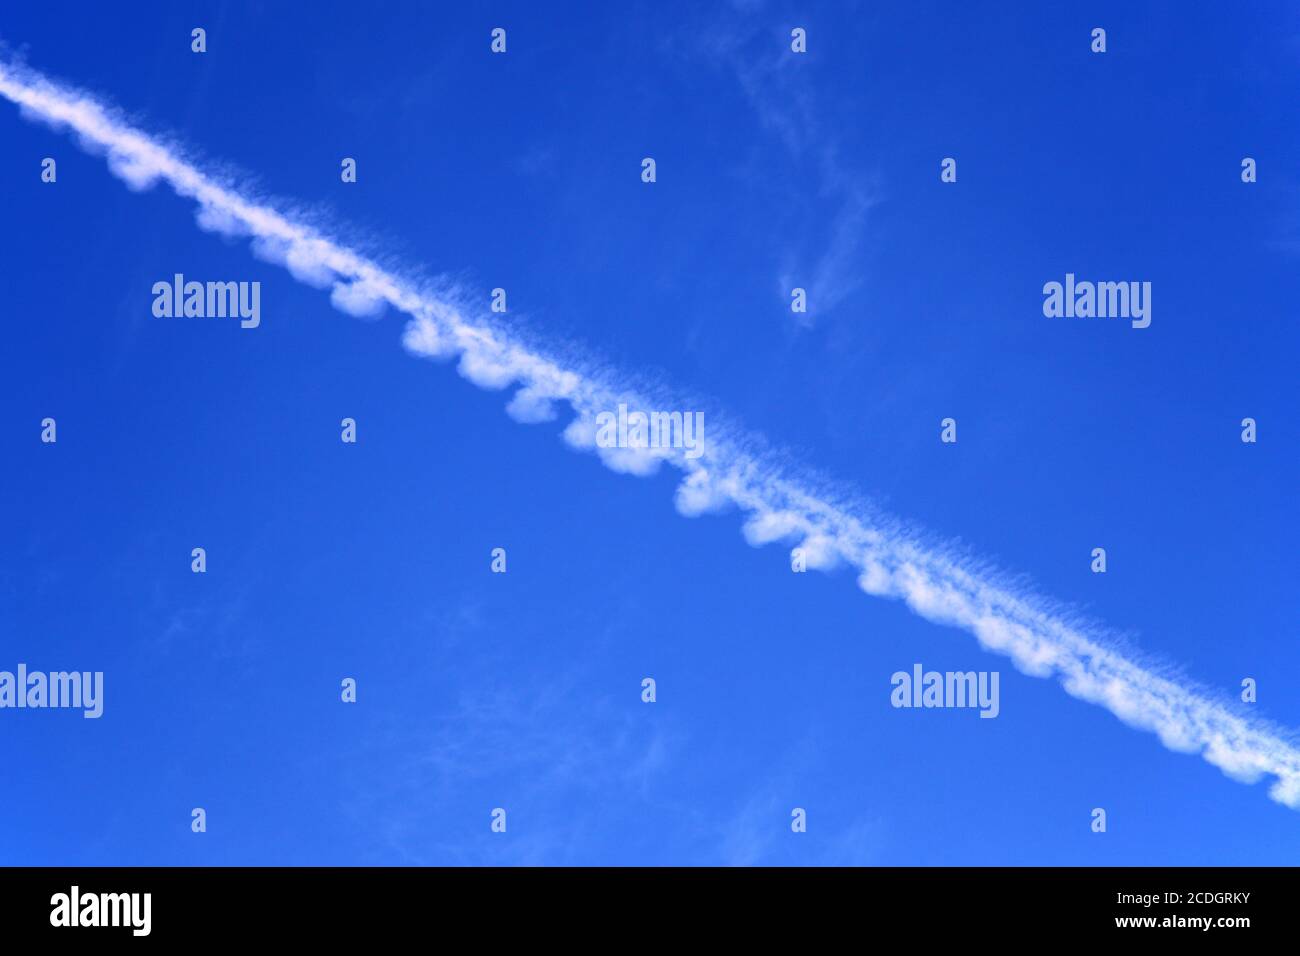 White aeroplane contrail, condensation trail or vapour trail against blue sky Stock Photo